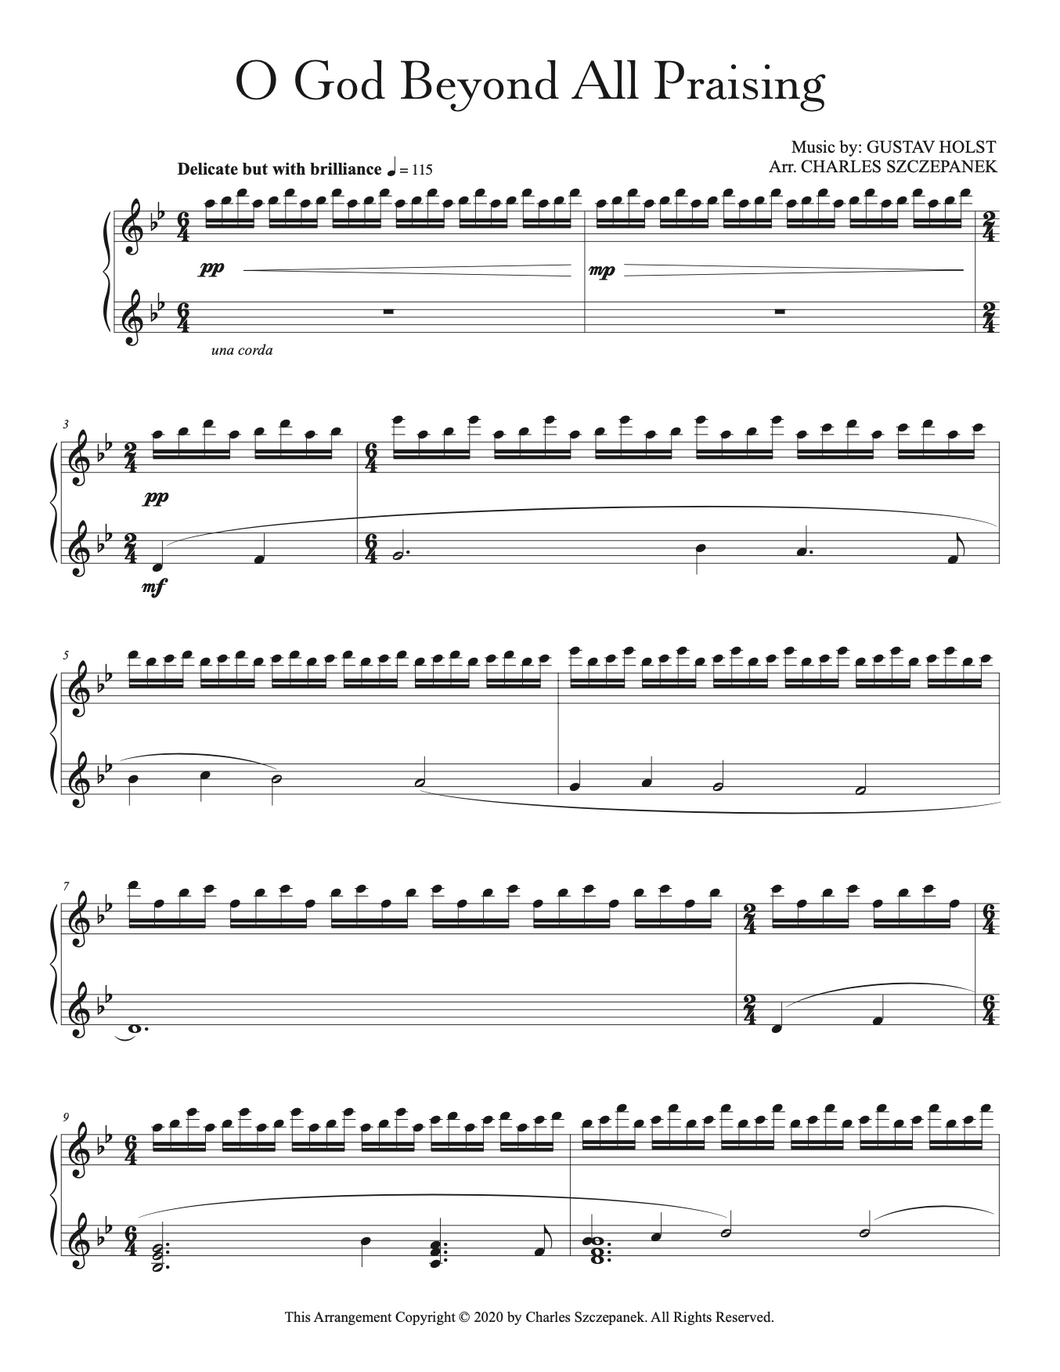 O God Beyond All Praising - Sheet Music for Solo Piano